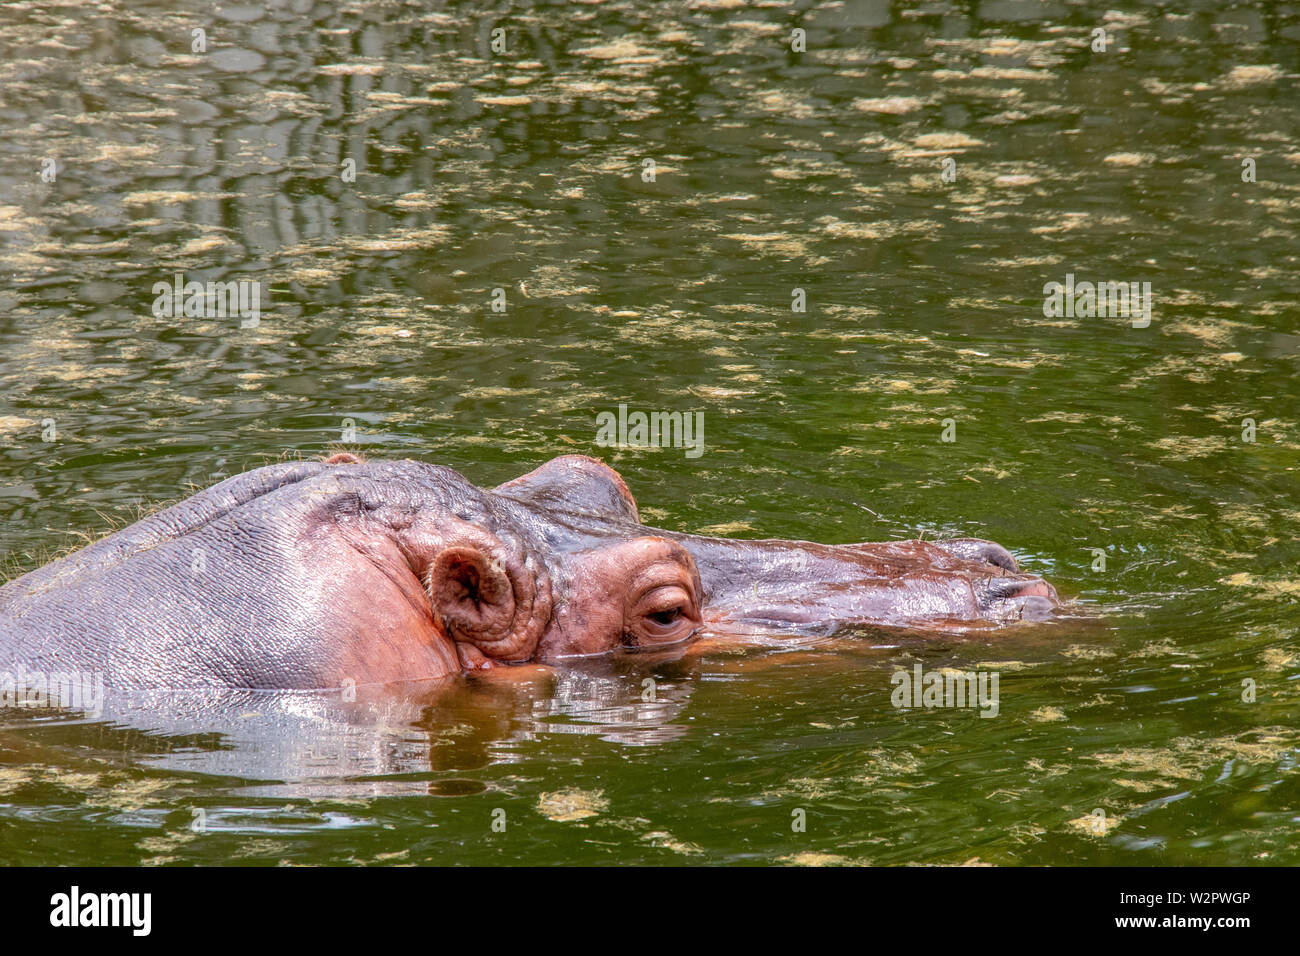 Hippopotamus bring head out of the water lake. Stock Photo